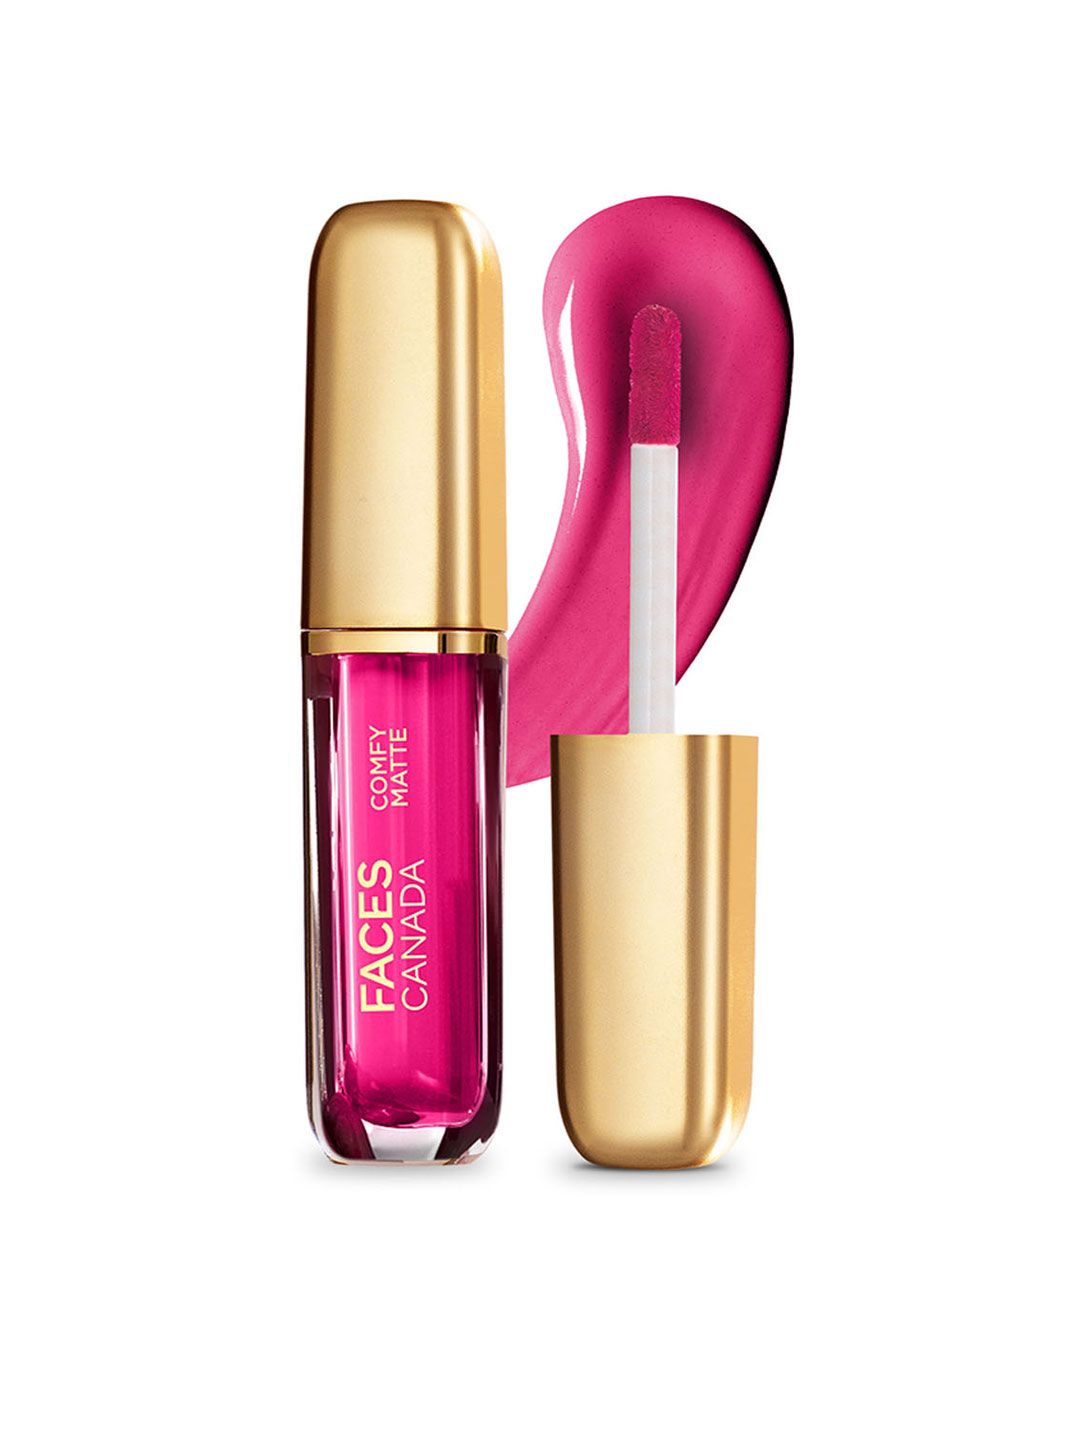 FACES CANADA Comfy Matte Lip Color 10Hr Long Stay with Almond Oil - Hope This Helps 06 Price in India